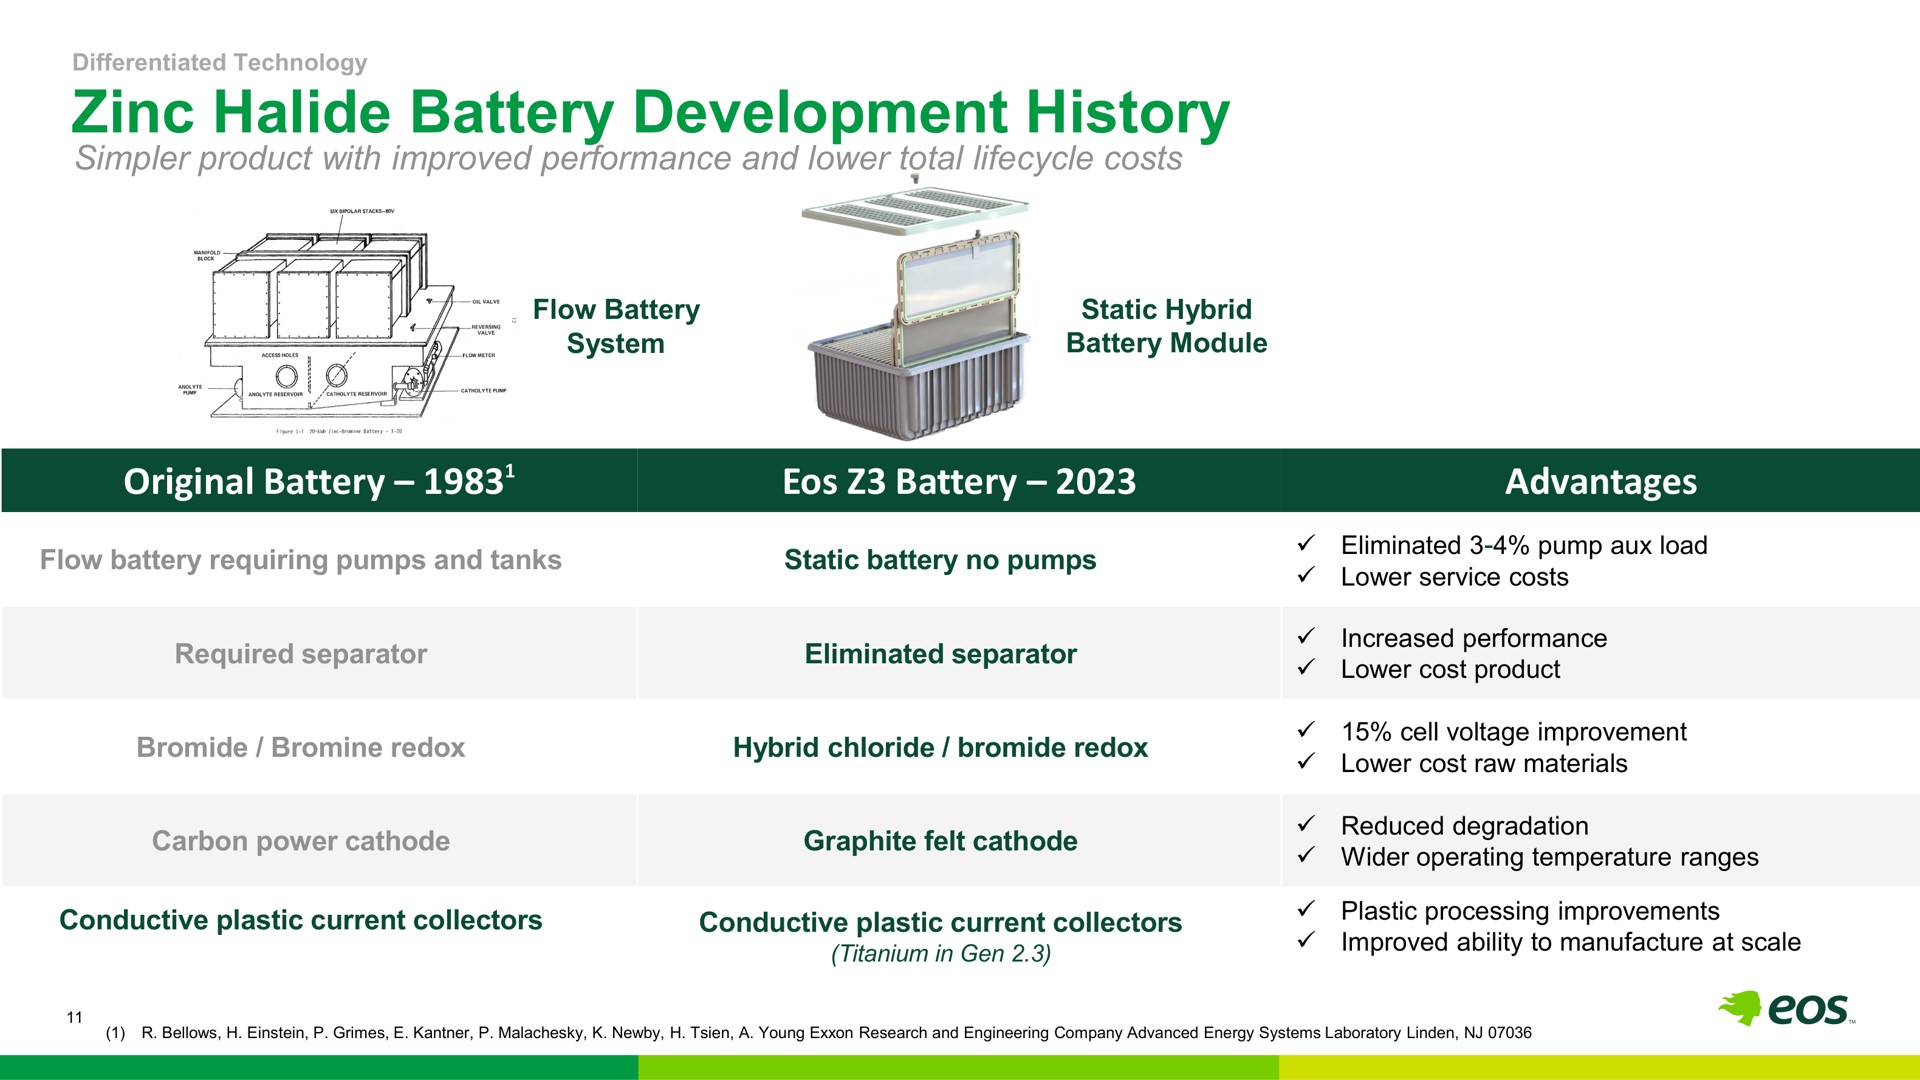 zinc halide battery development history a global leader with large growing businesses original battery battery advantages | Eos Energy